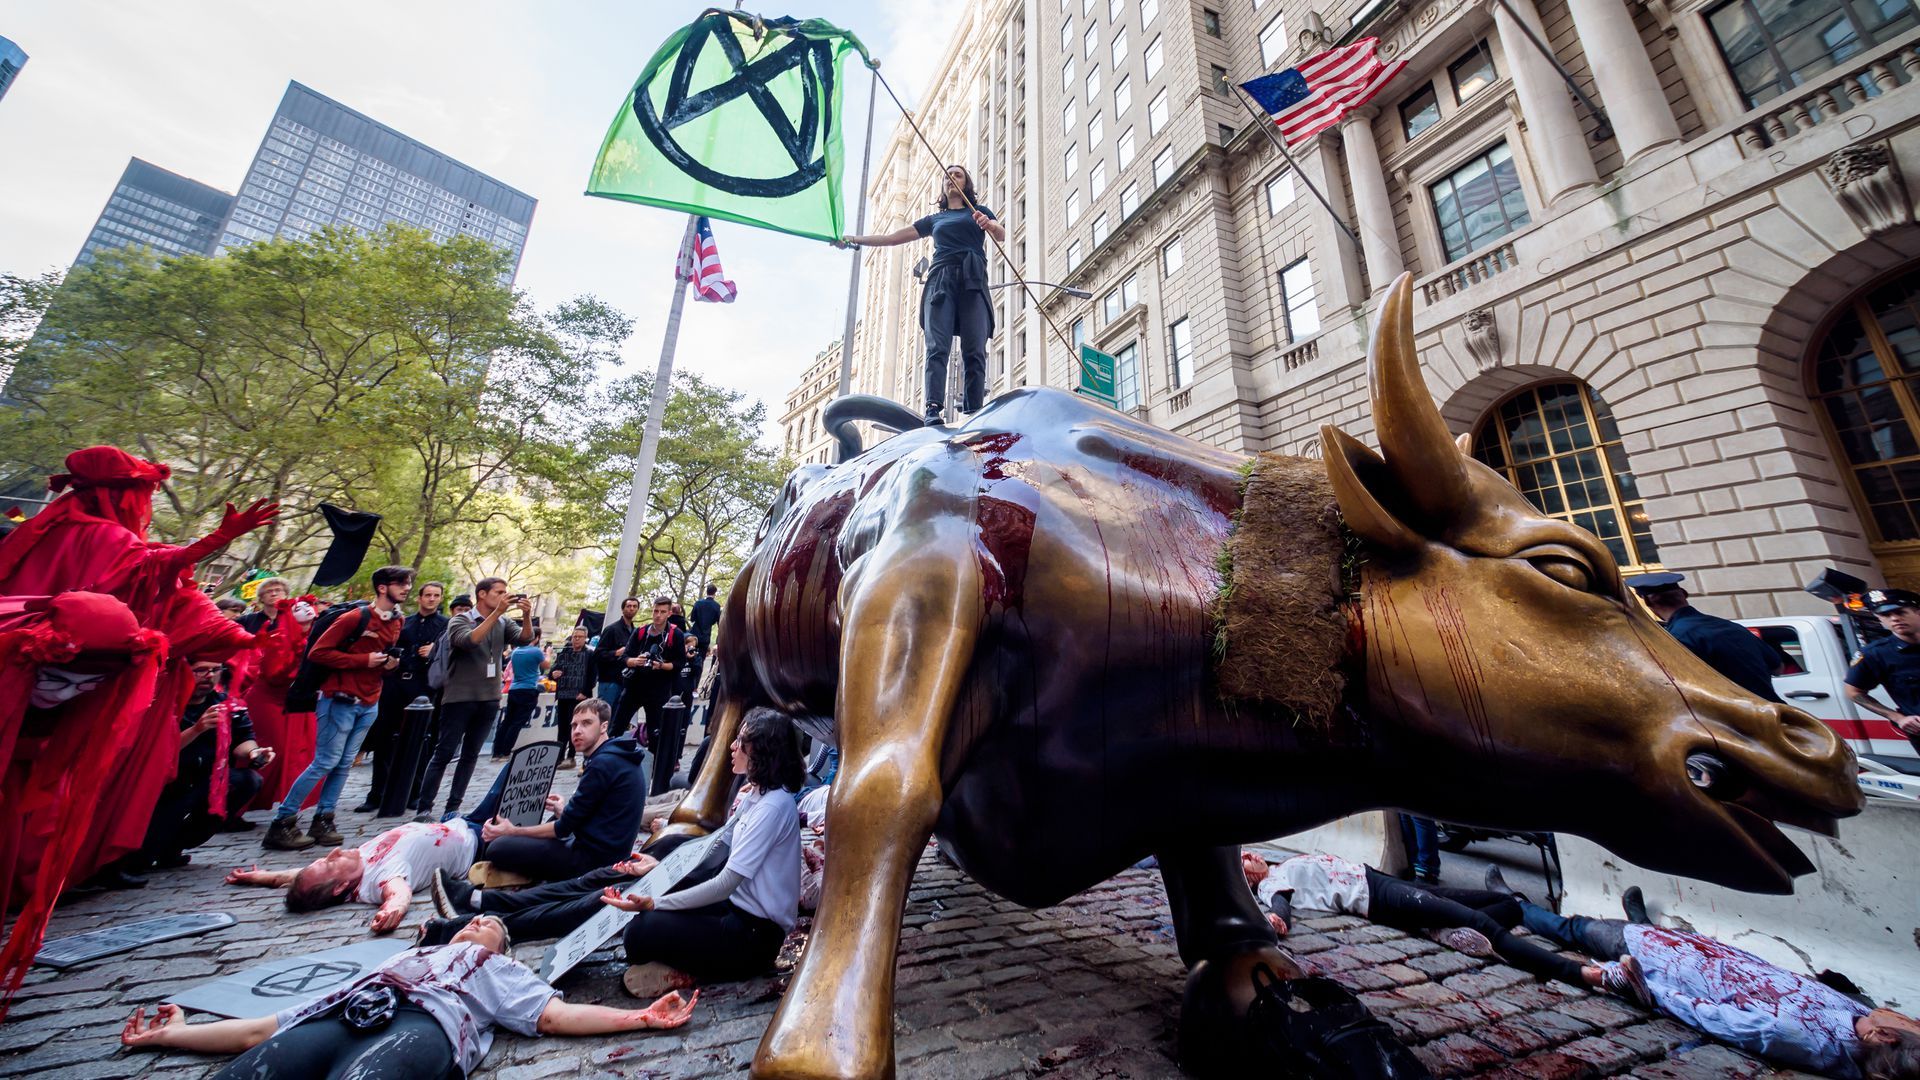 An Extinction Rebellion activist stands on top of the Wall Street Bull